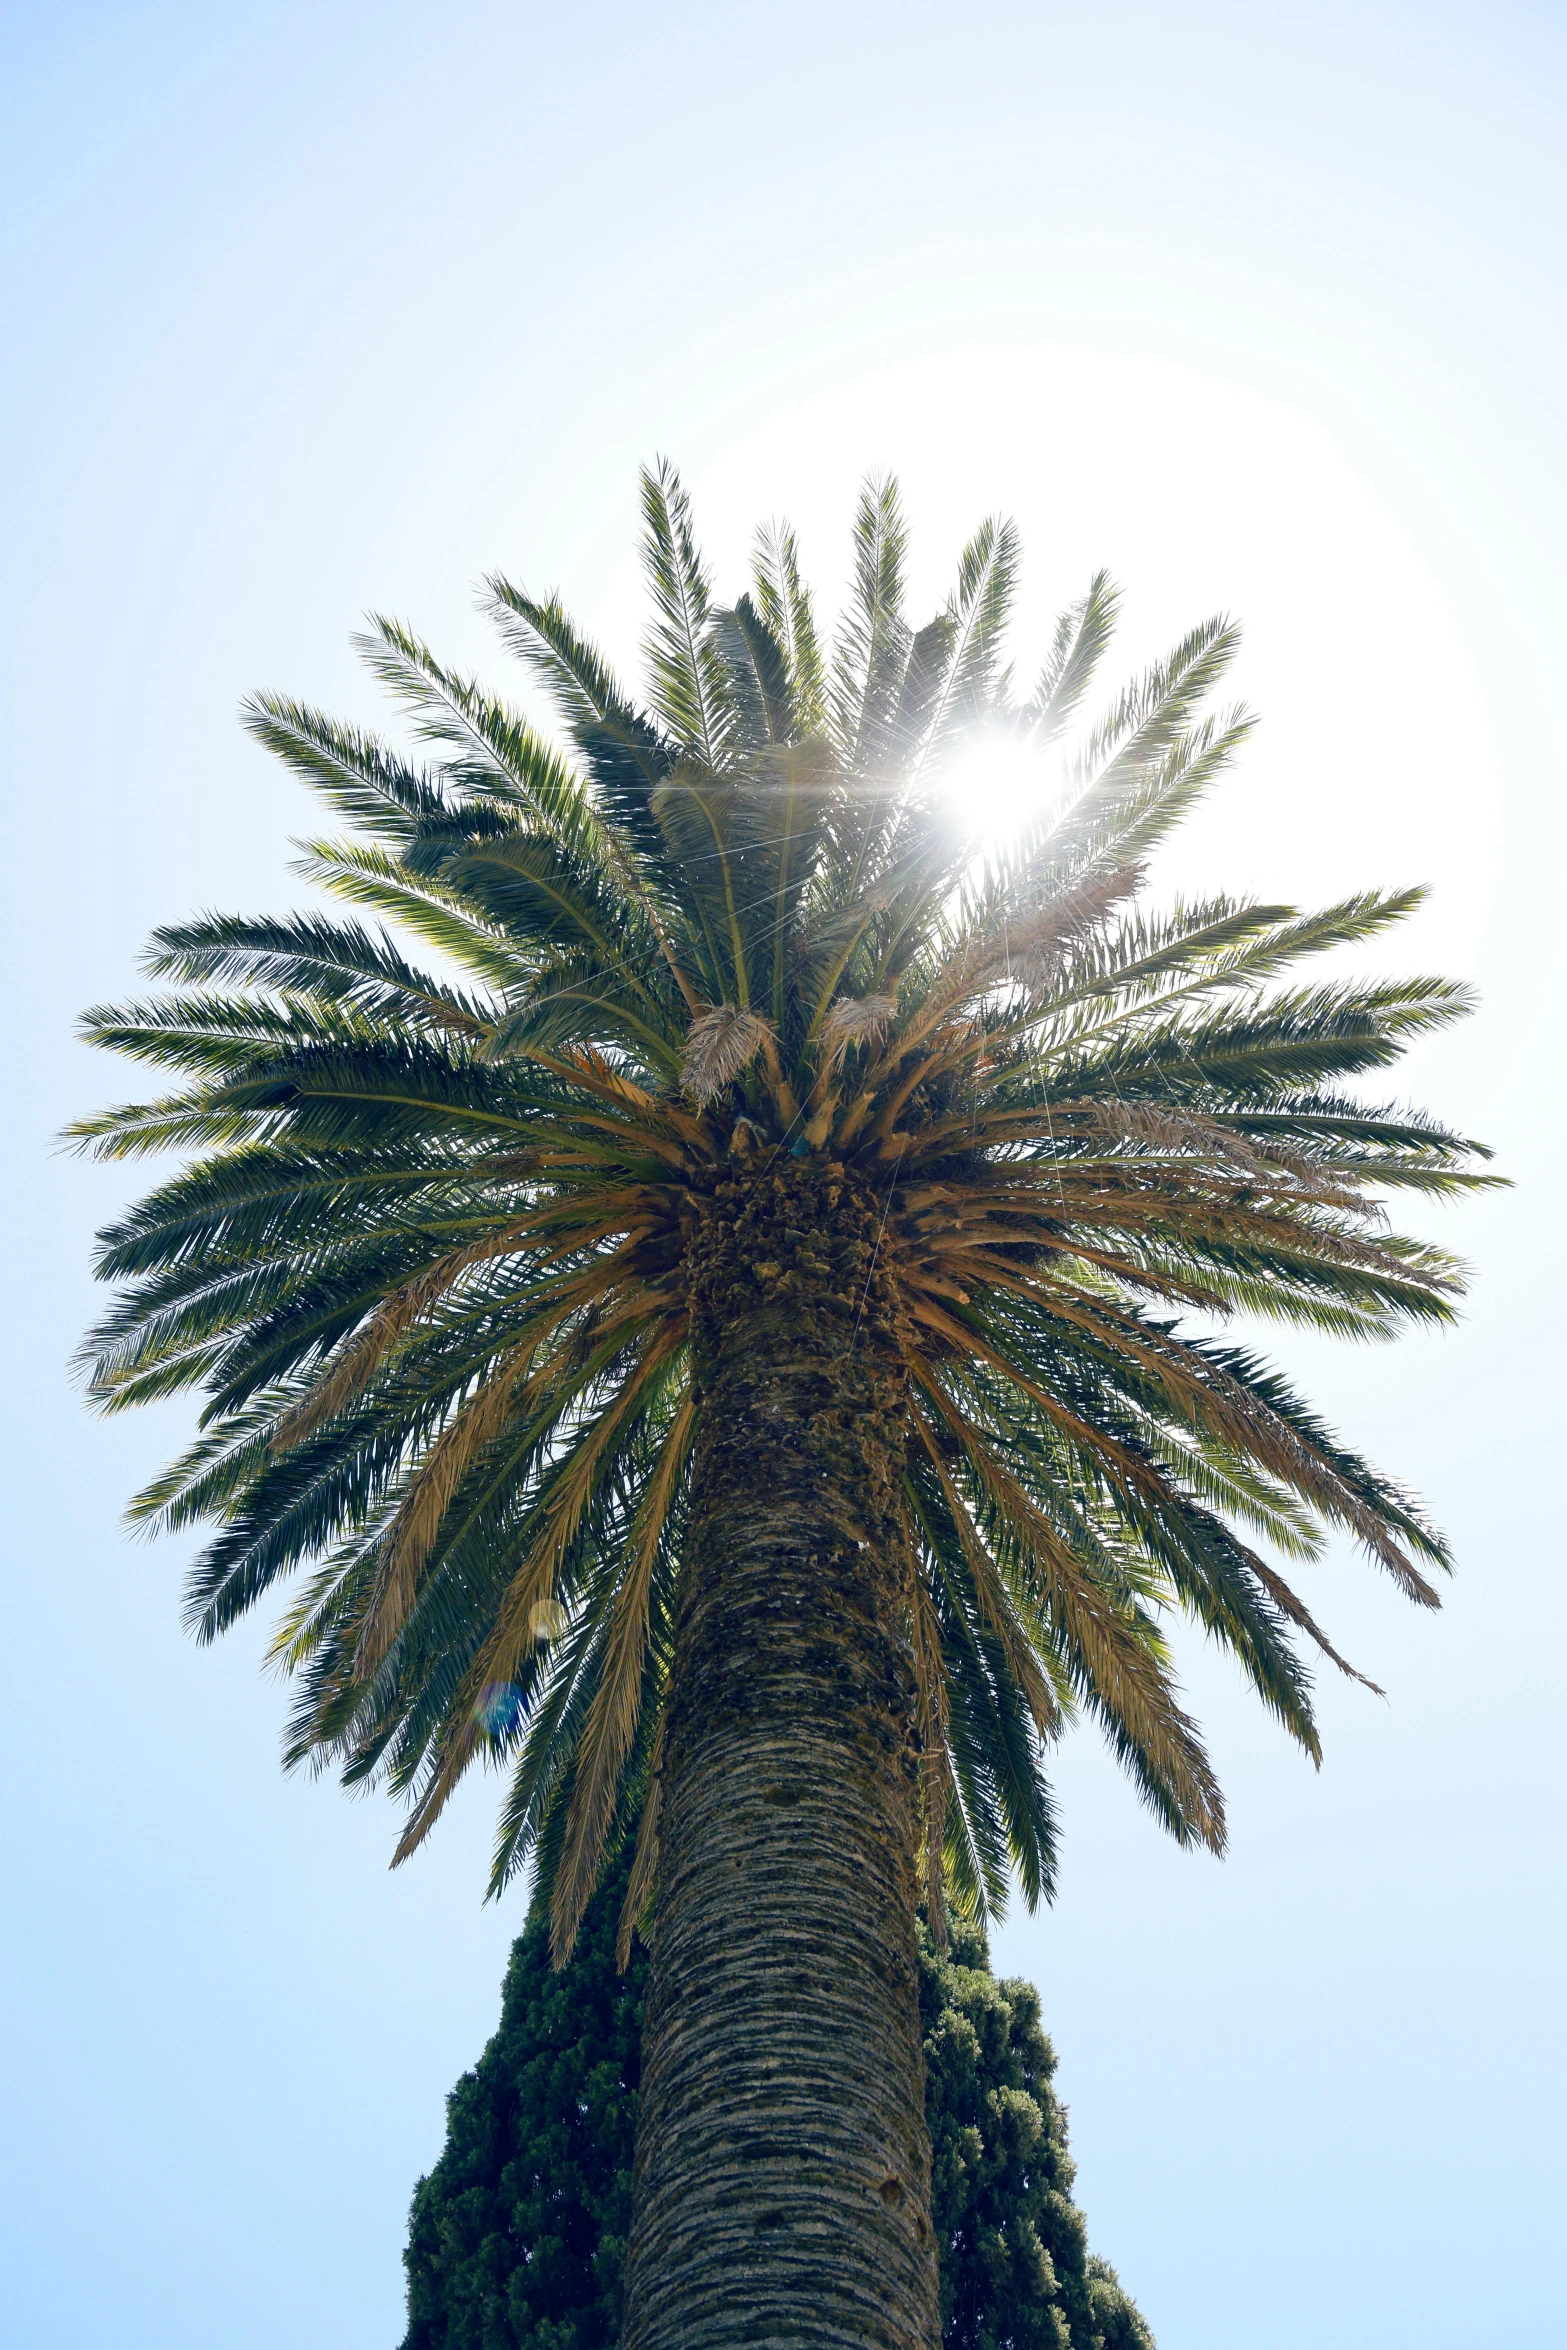 the sun peeking out over a palm tree